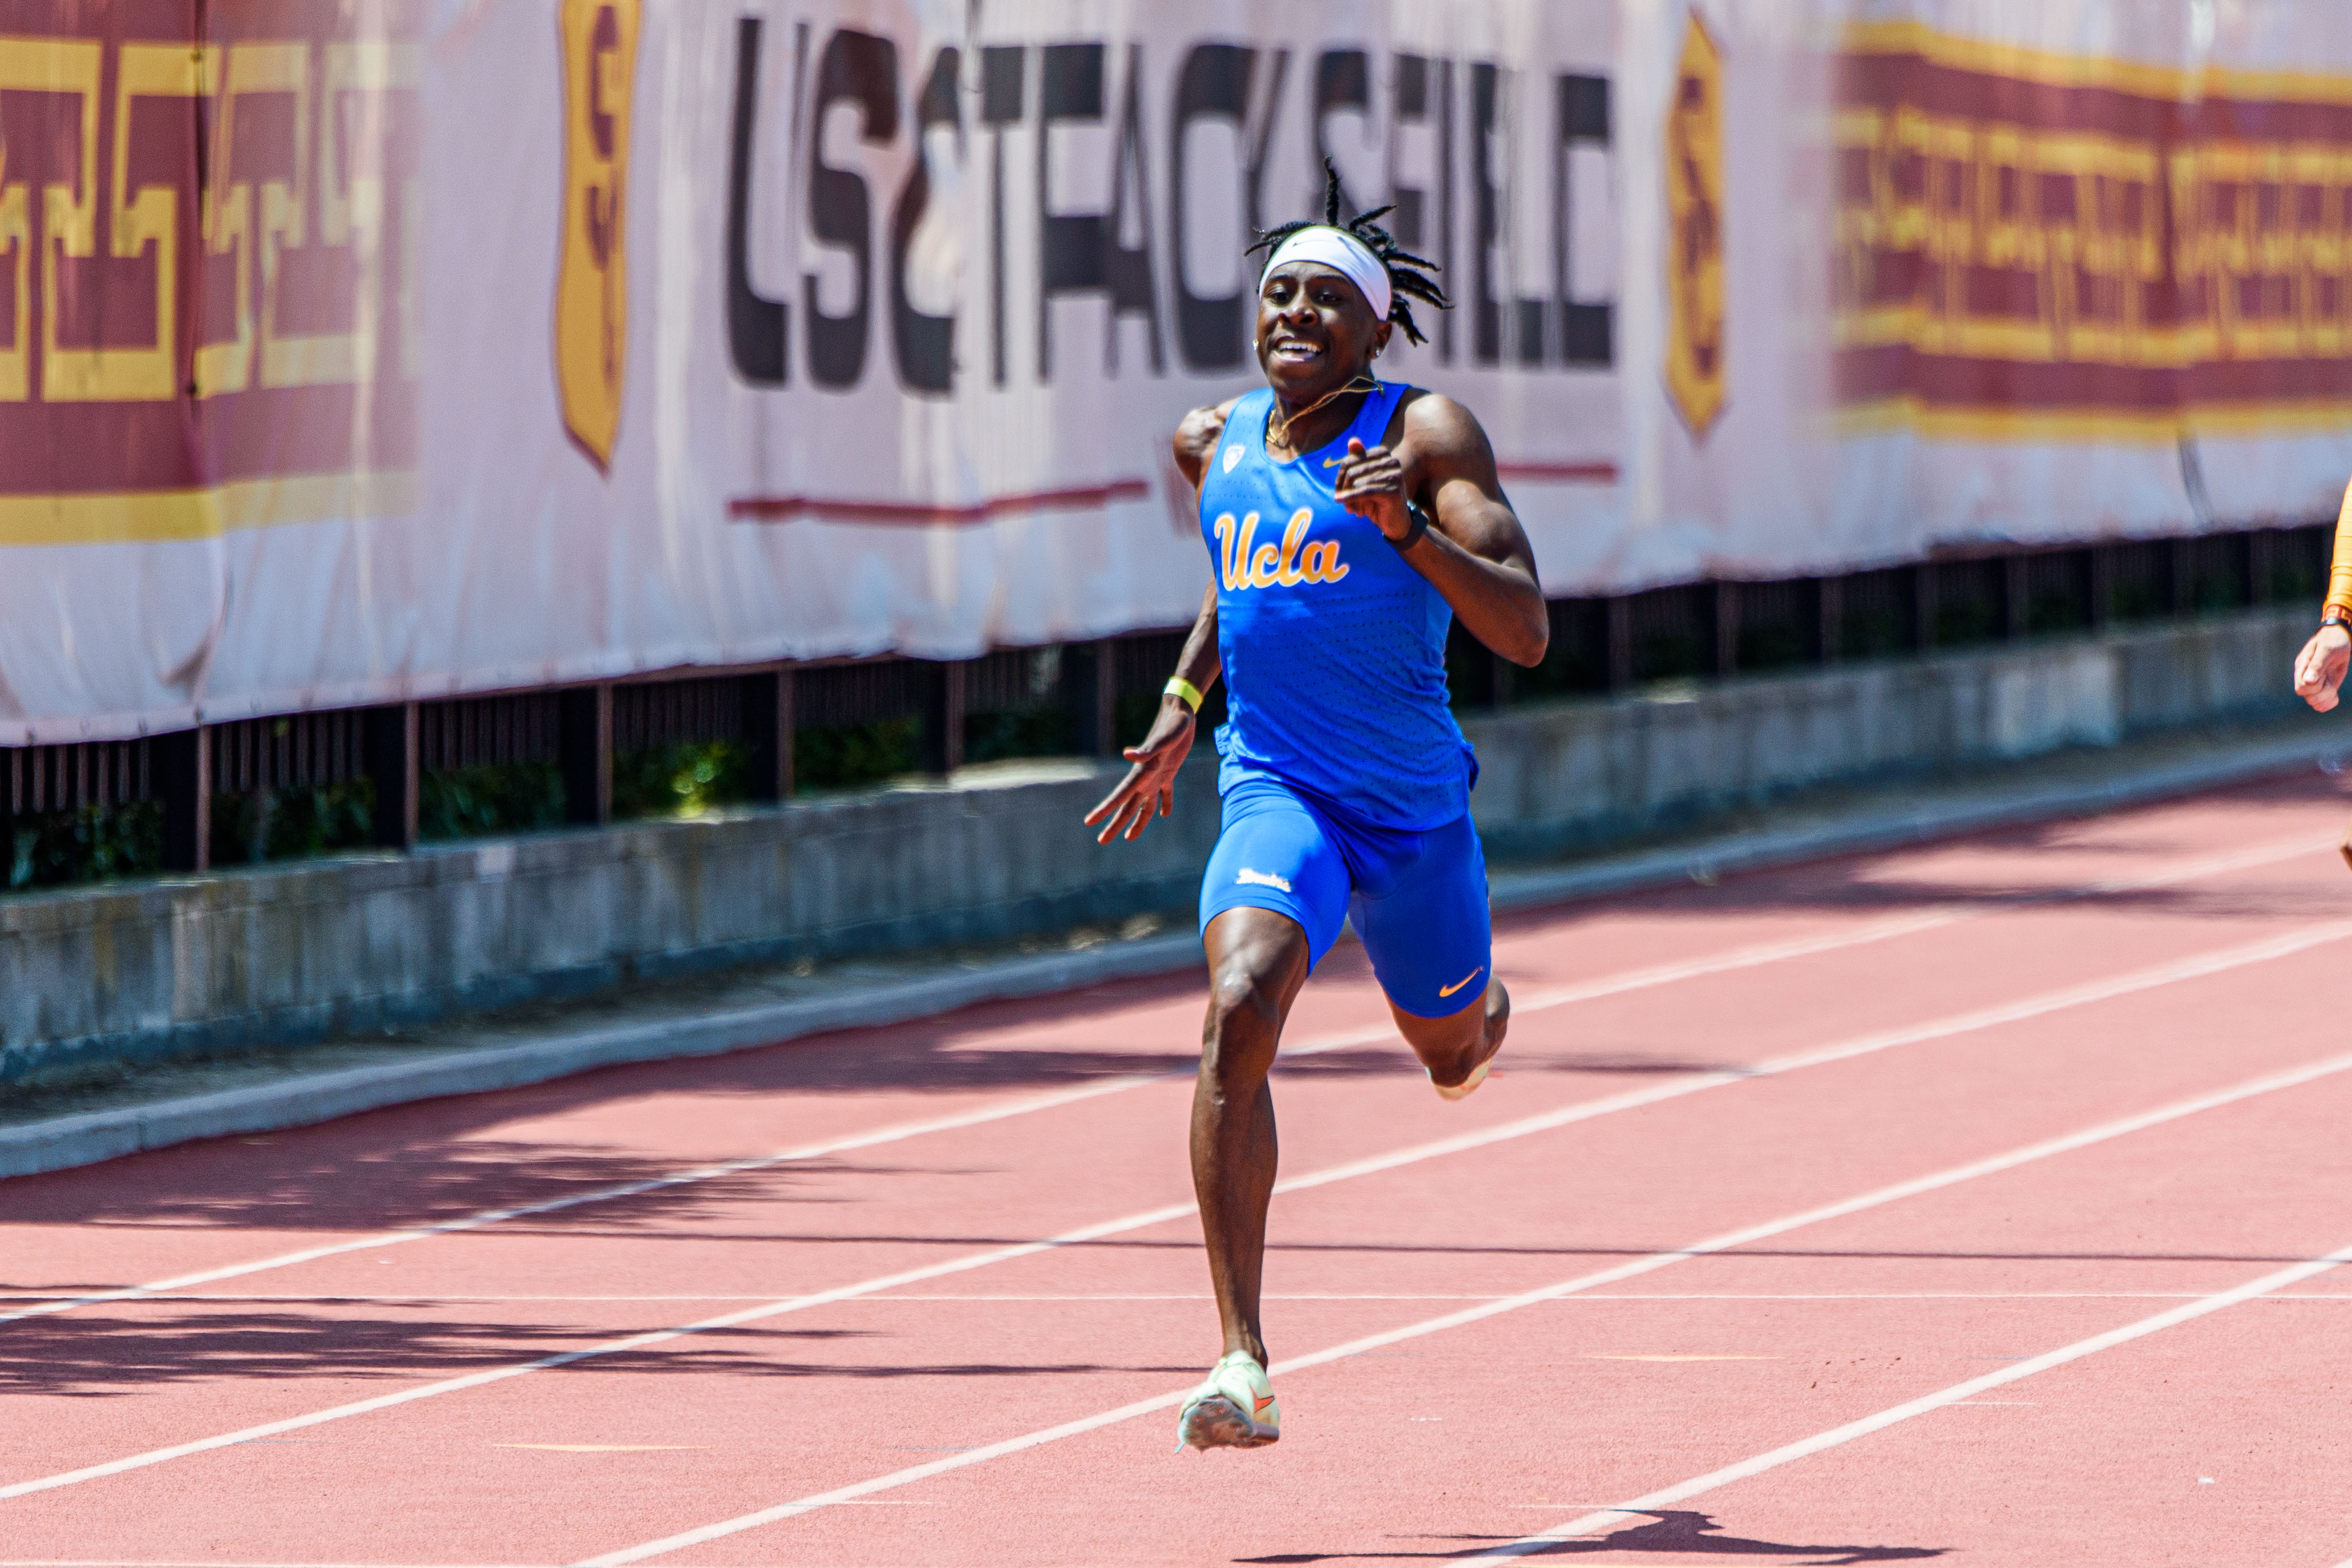 UCLA track and field kicks off outdoor season by breaking records at Texas Relays Daily Bruin